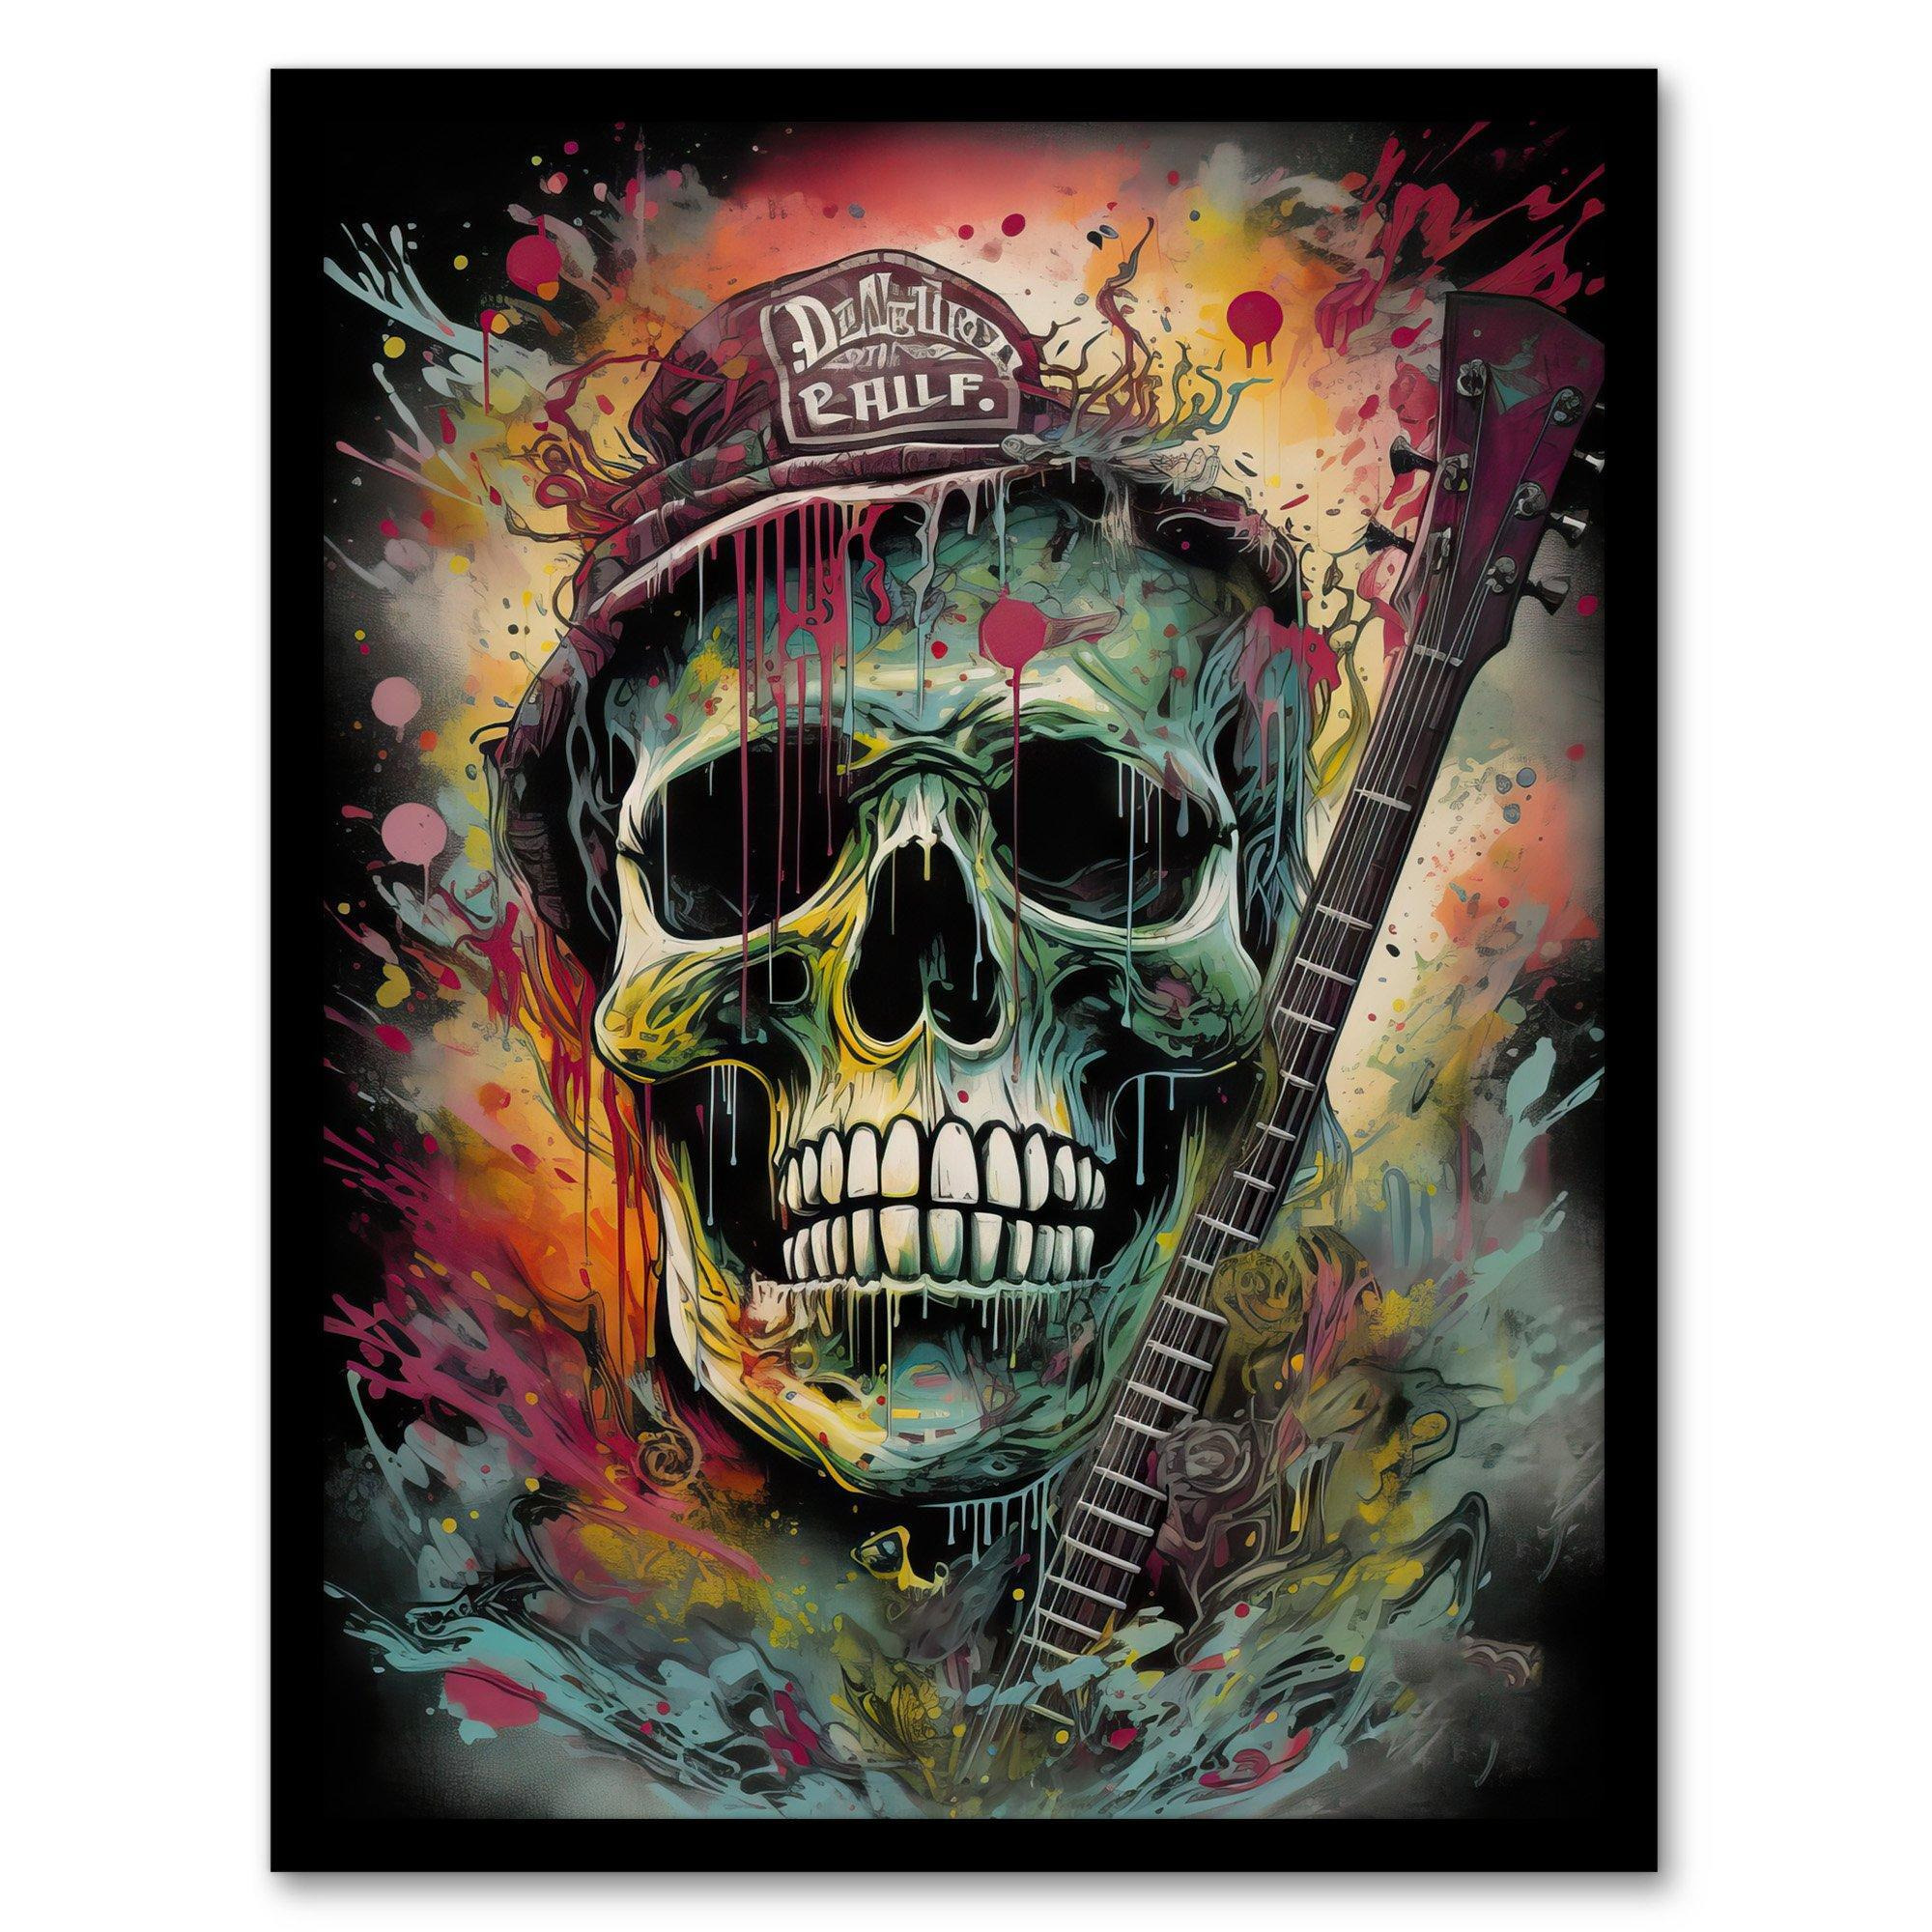 Hillbilly Music Artwork Rockabilly Country Metal Skull With Electric Guitar Vibrant Painting Art Print Framed Poster Wall Decor - image 1